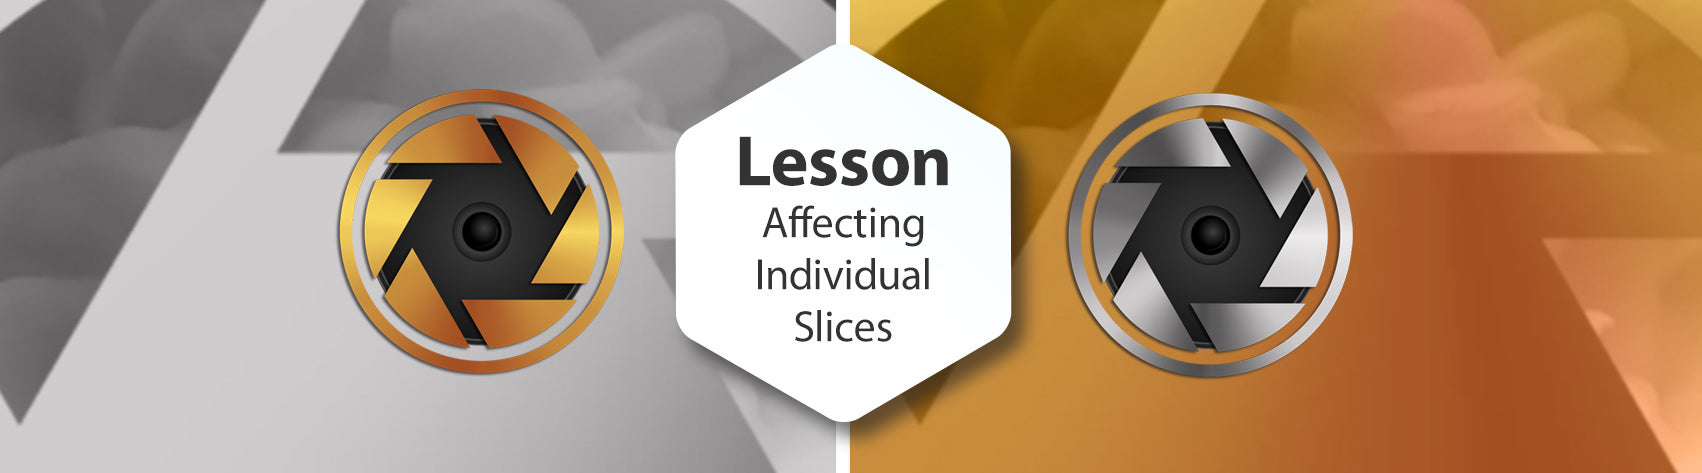 Lesson - Affecting Individual Slices (Director Only)